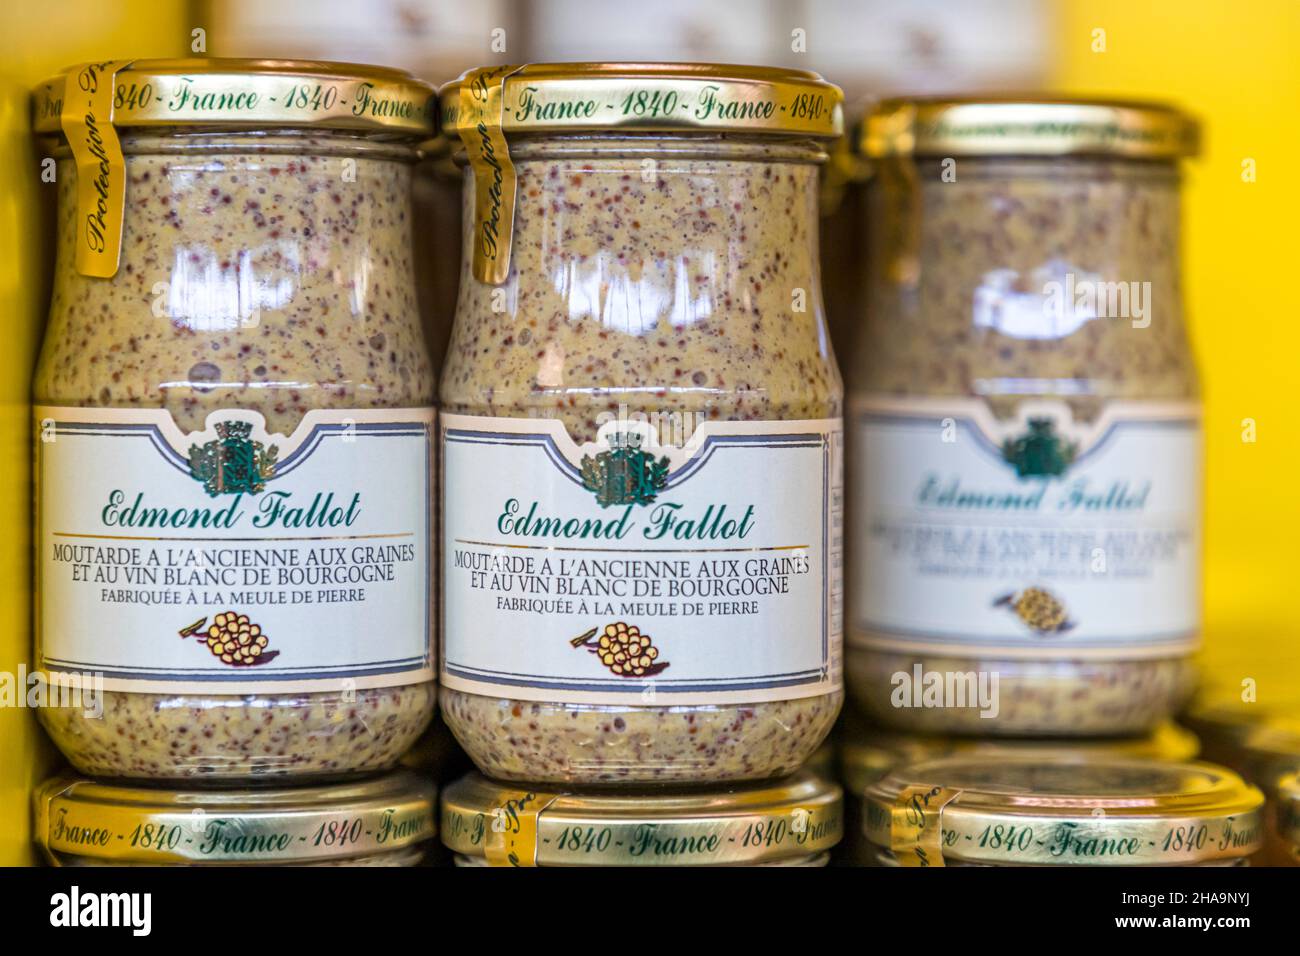 Old fashioned mustard with seeds and white wine from Burgundy by the Moutarderie (Mustard Factory) Edmond Fallot in Beaune, France Stock Photo